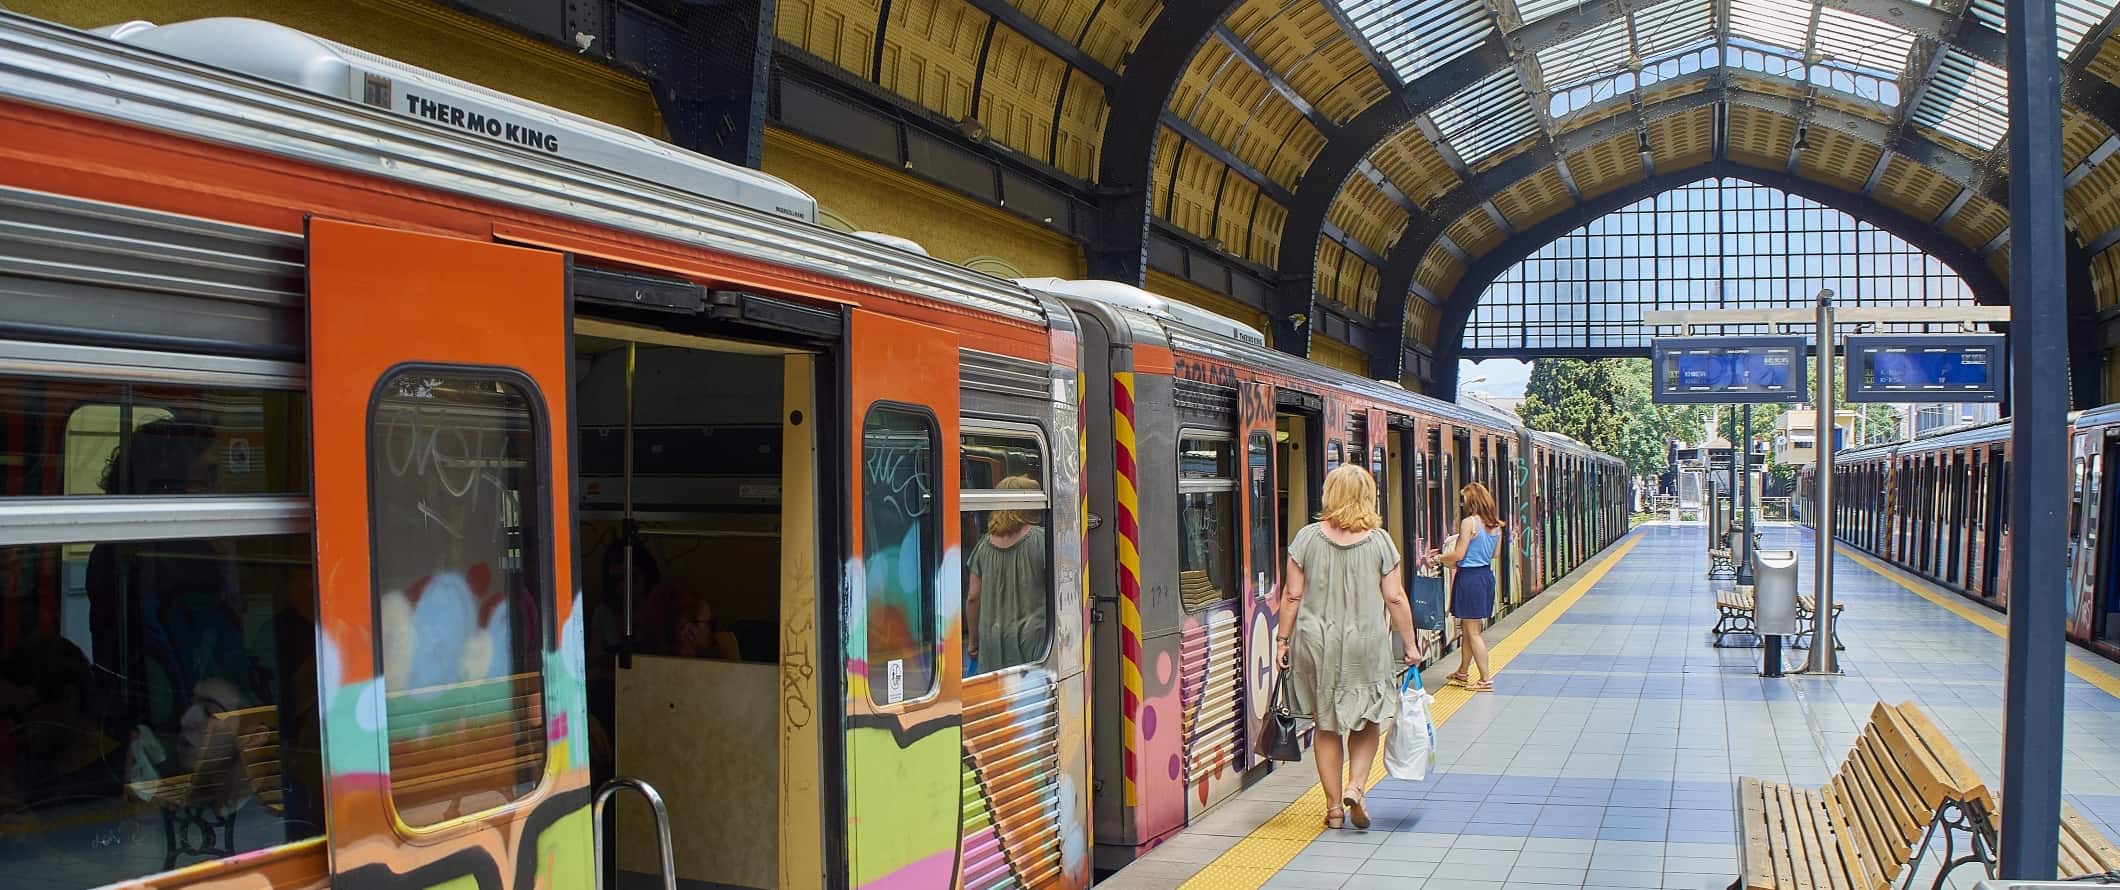 Bright, natural-light-filled train station in Athens with a colorful subway car.